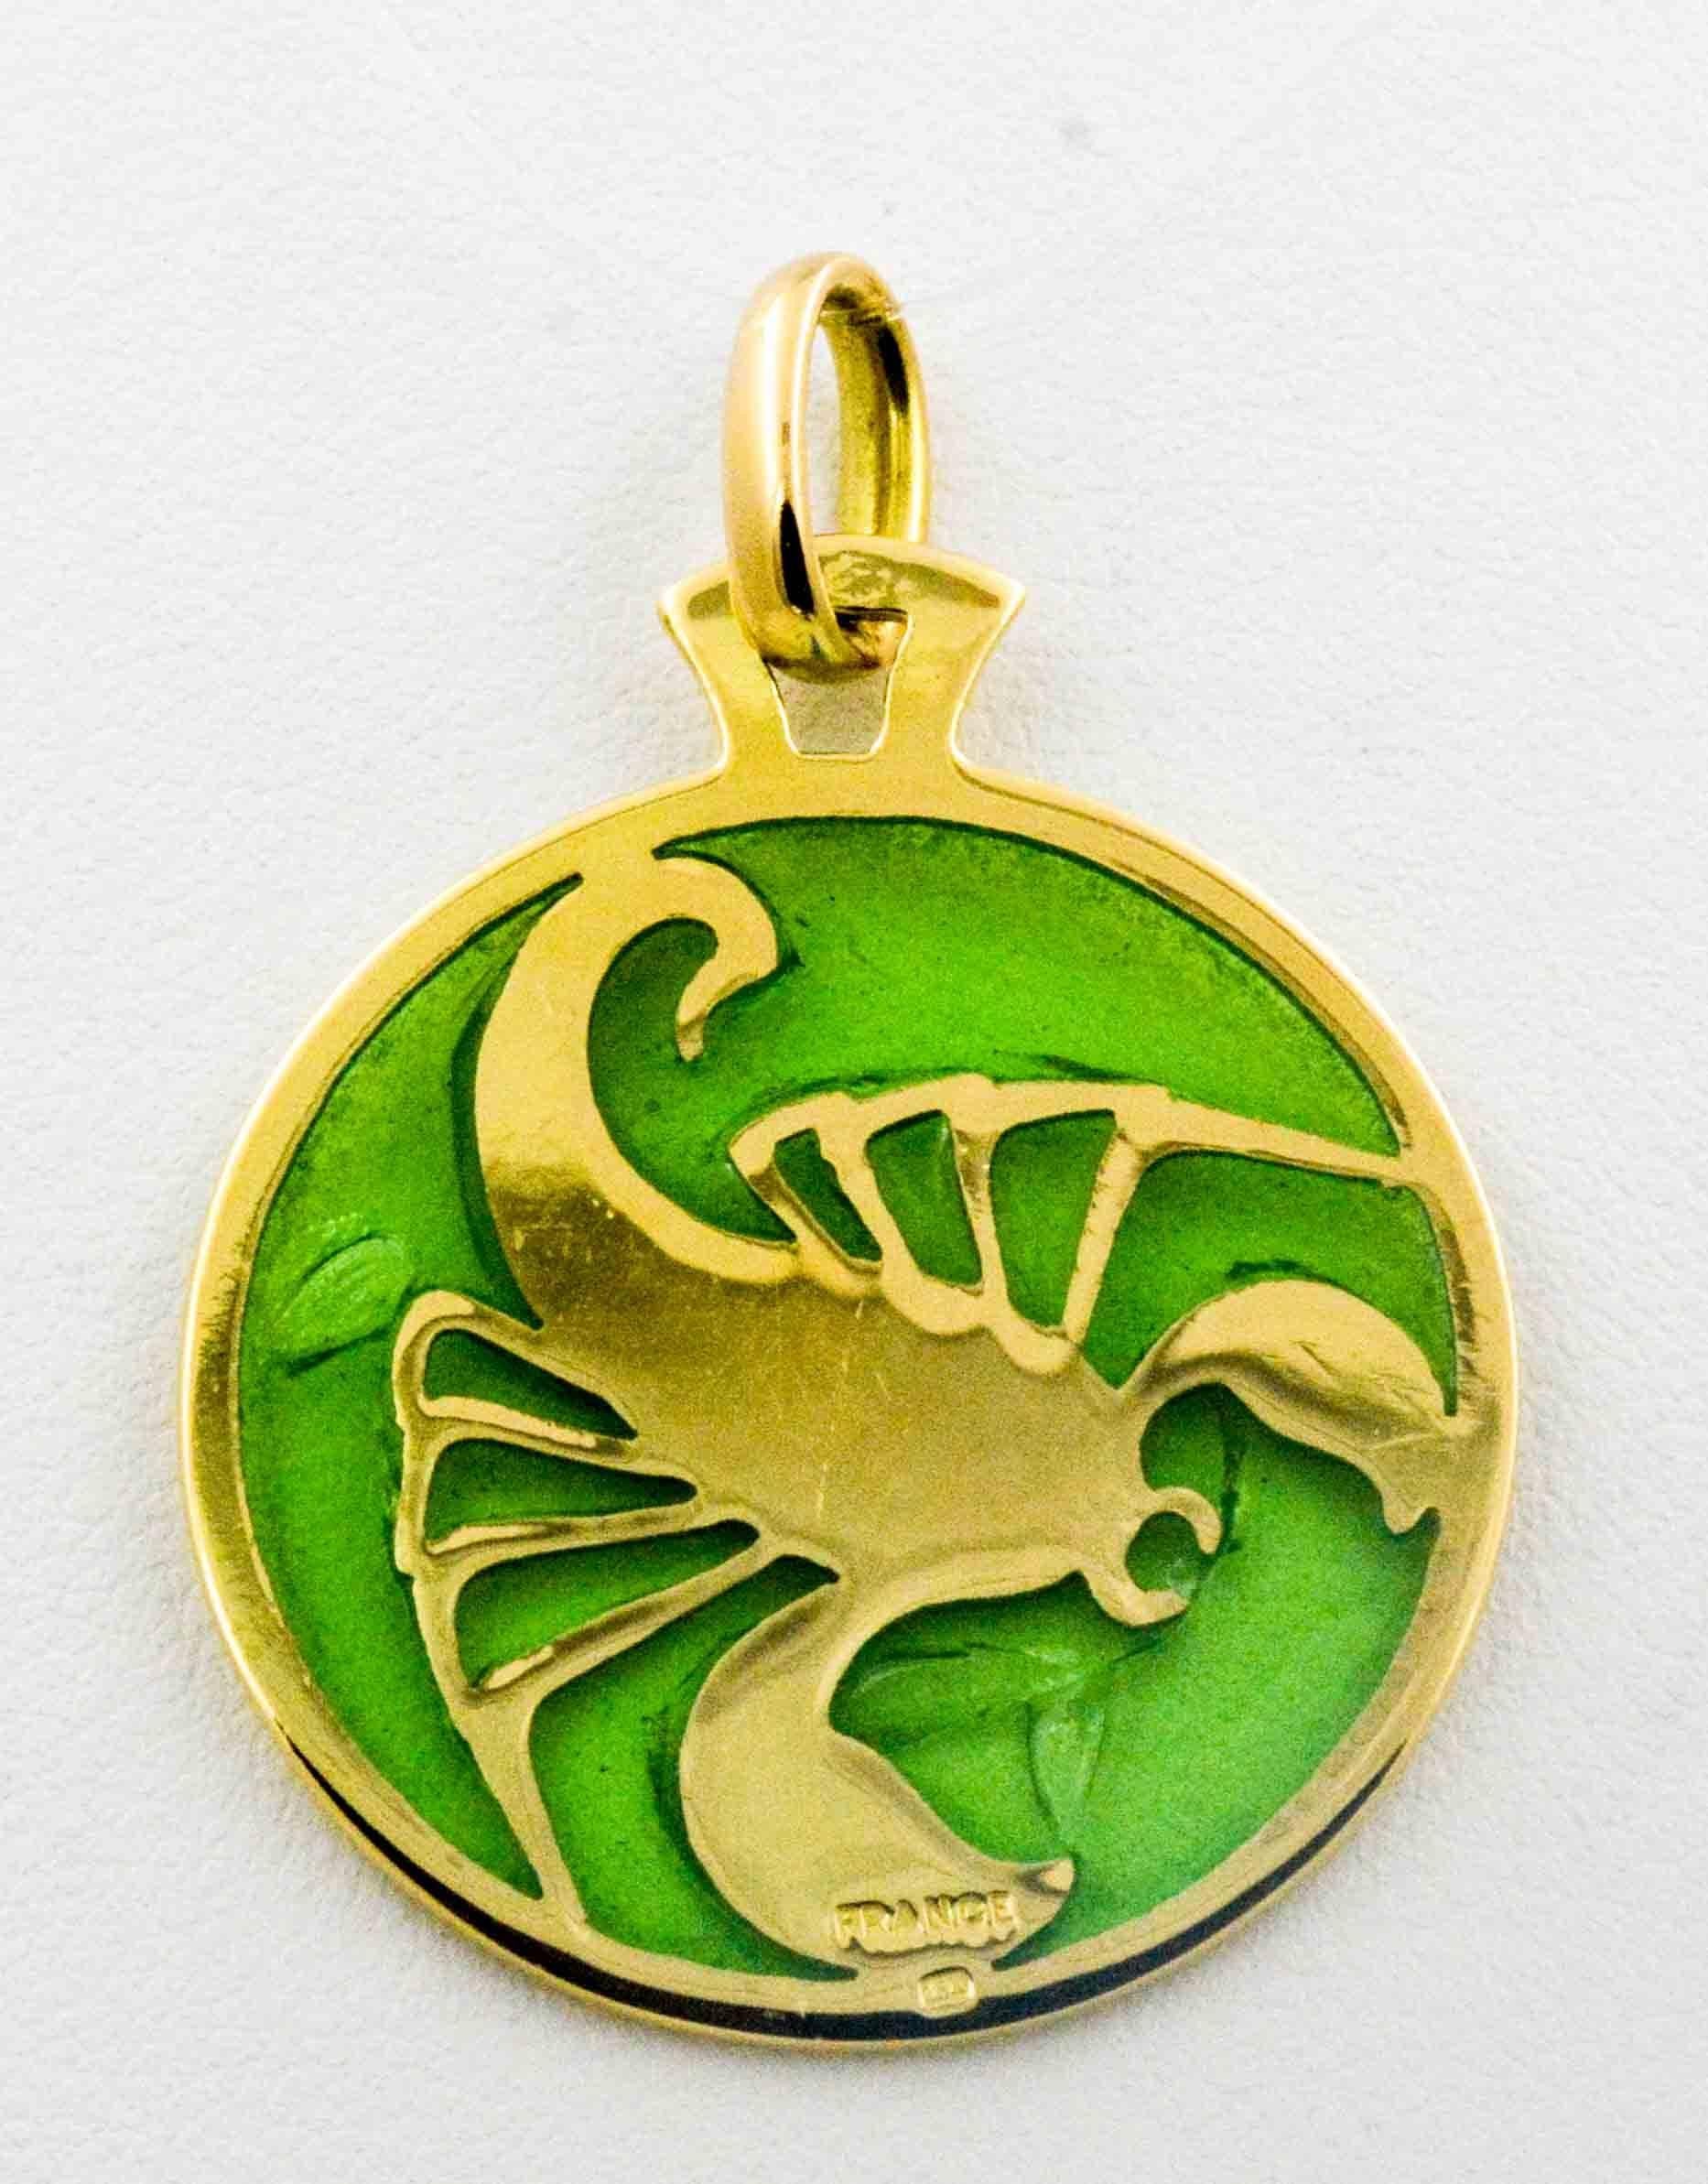 On a brilliant green background of hand enameled glass lies Scorpio, crafted in brown and yellow glass enamel, accented by 18 karat yellow gold. This captivating and delicate little pendant is hand enameled by a master craftsman in the art of Plique